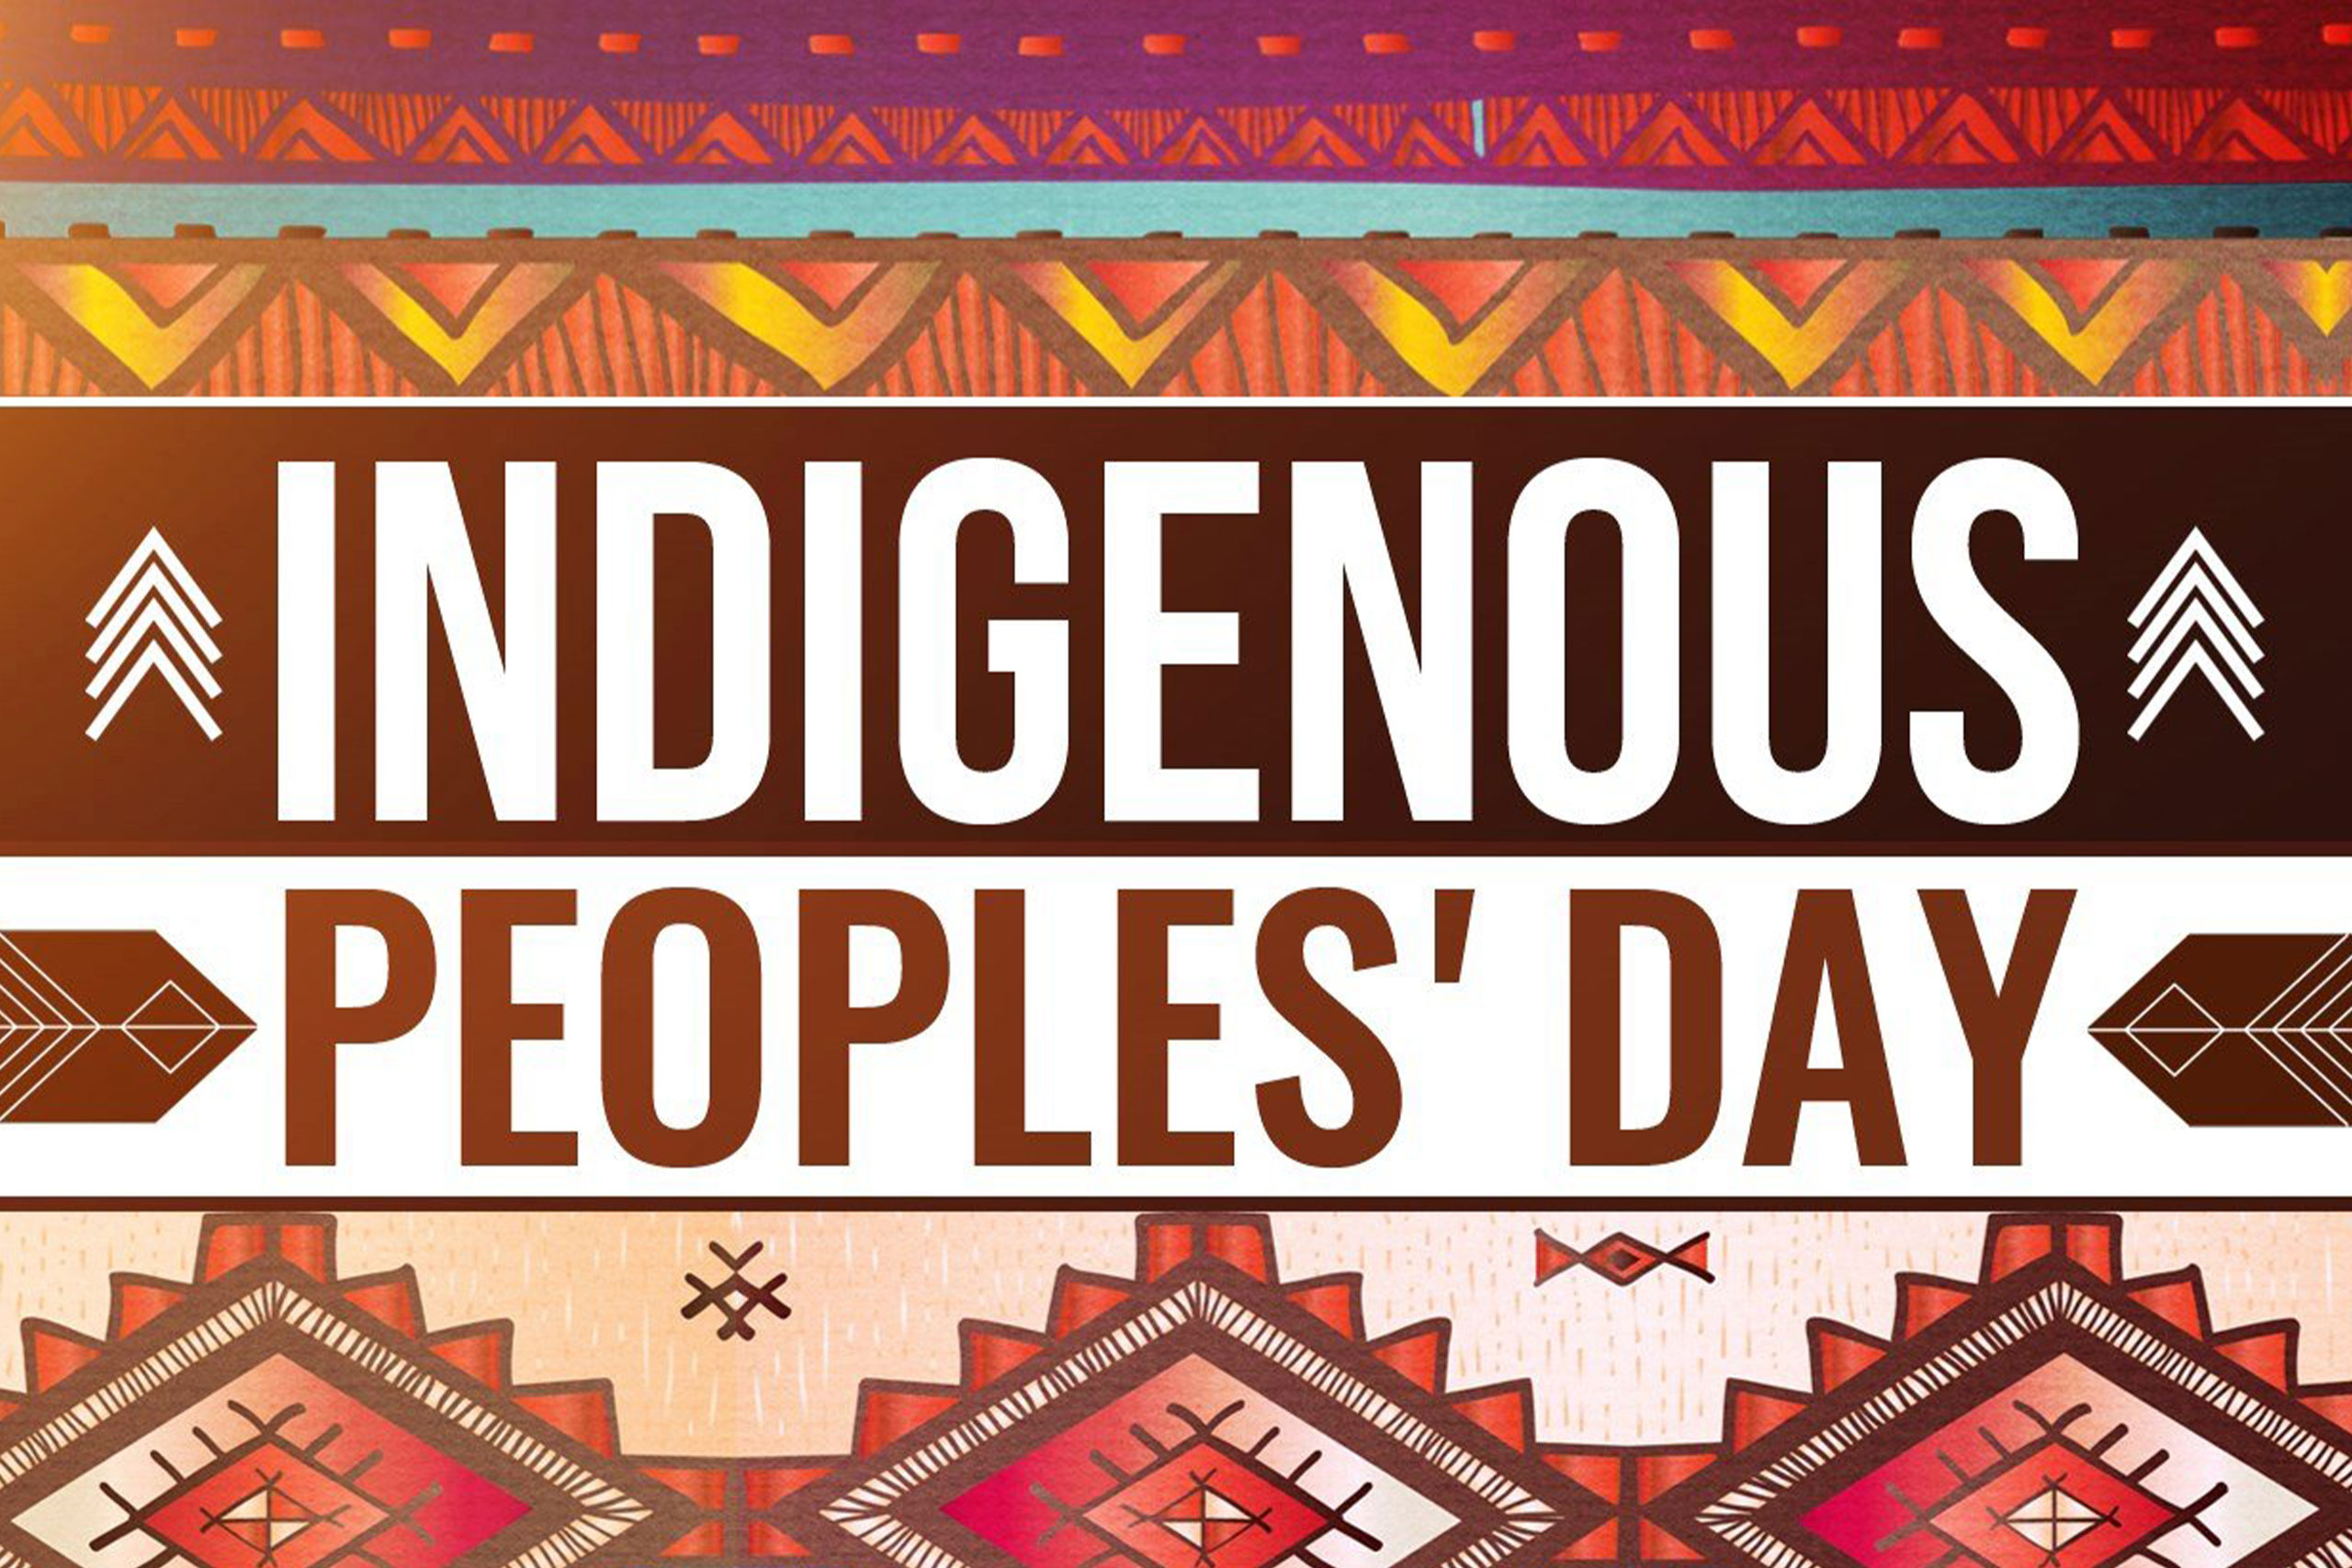 Celebrating Indigenous Peoples Day